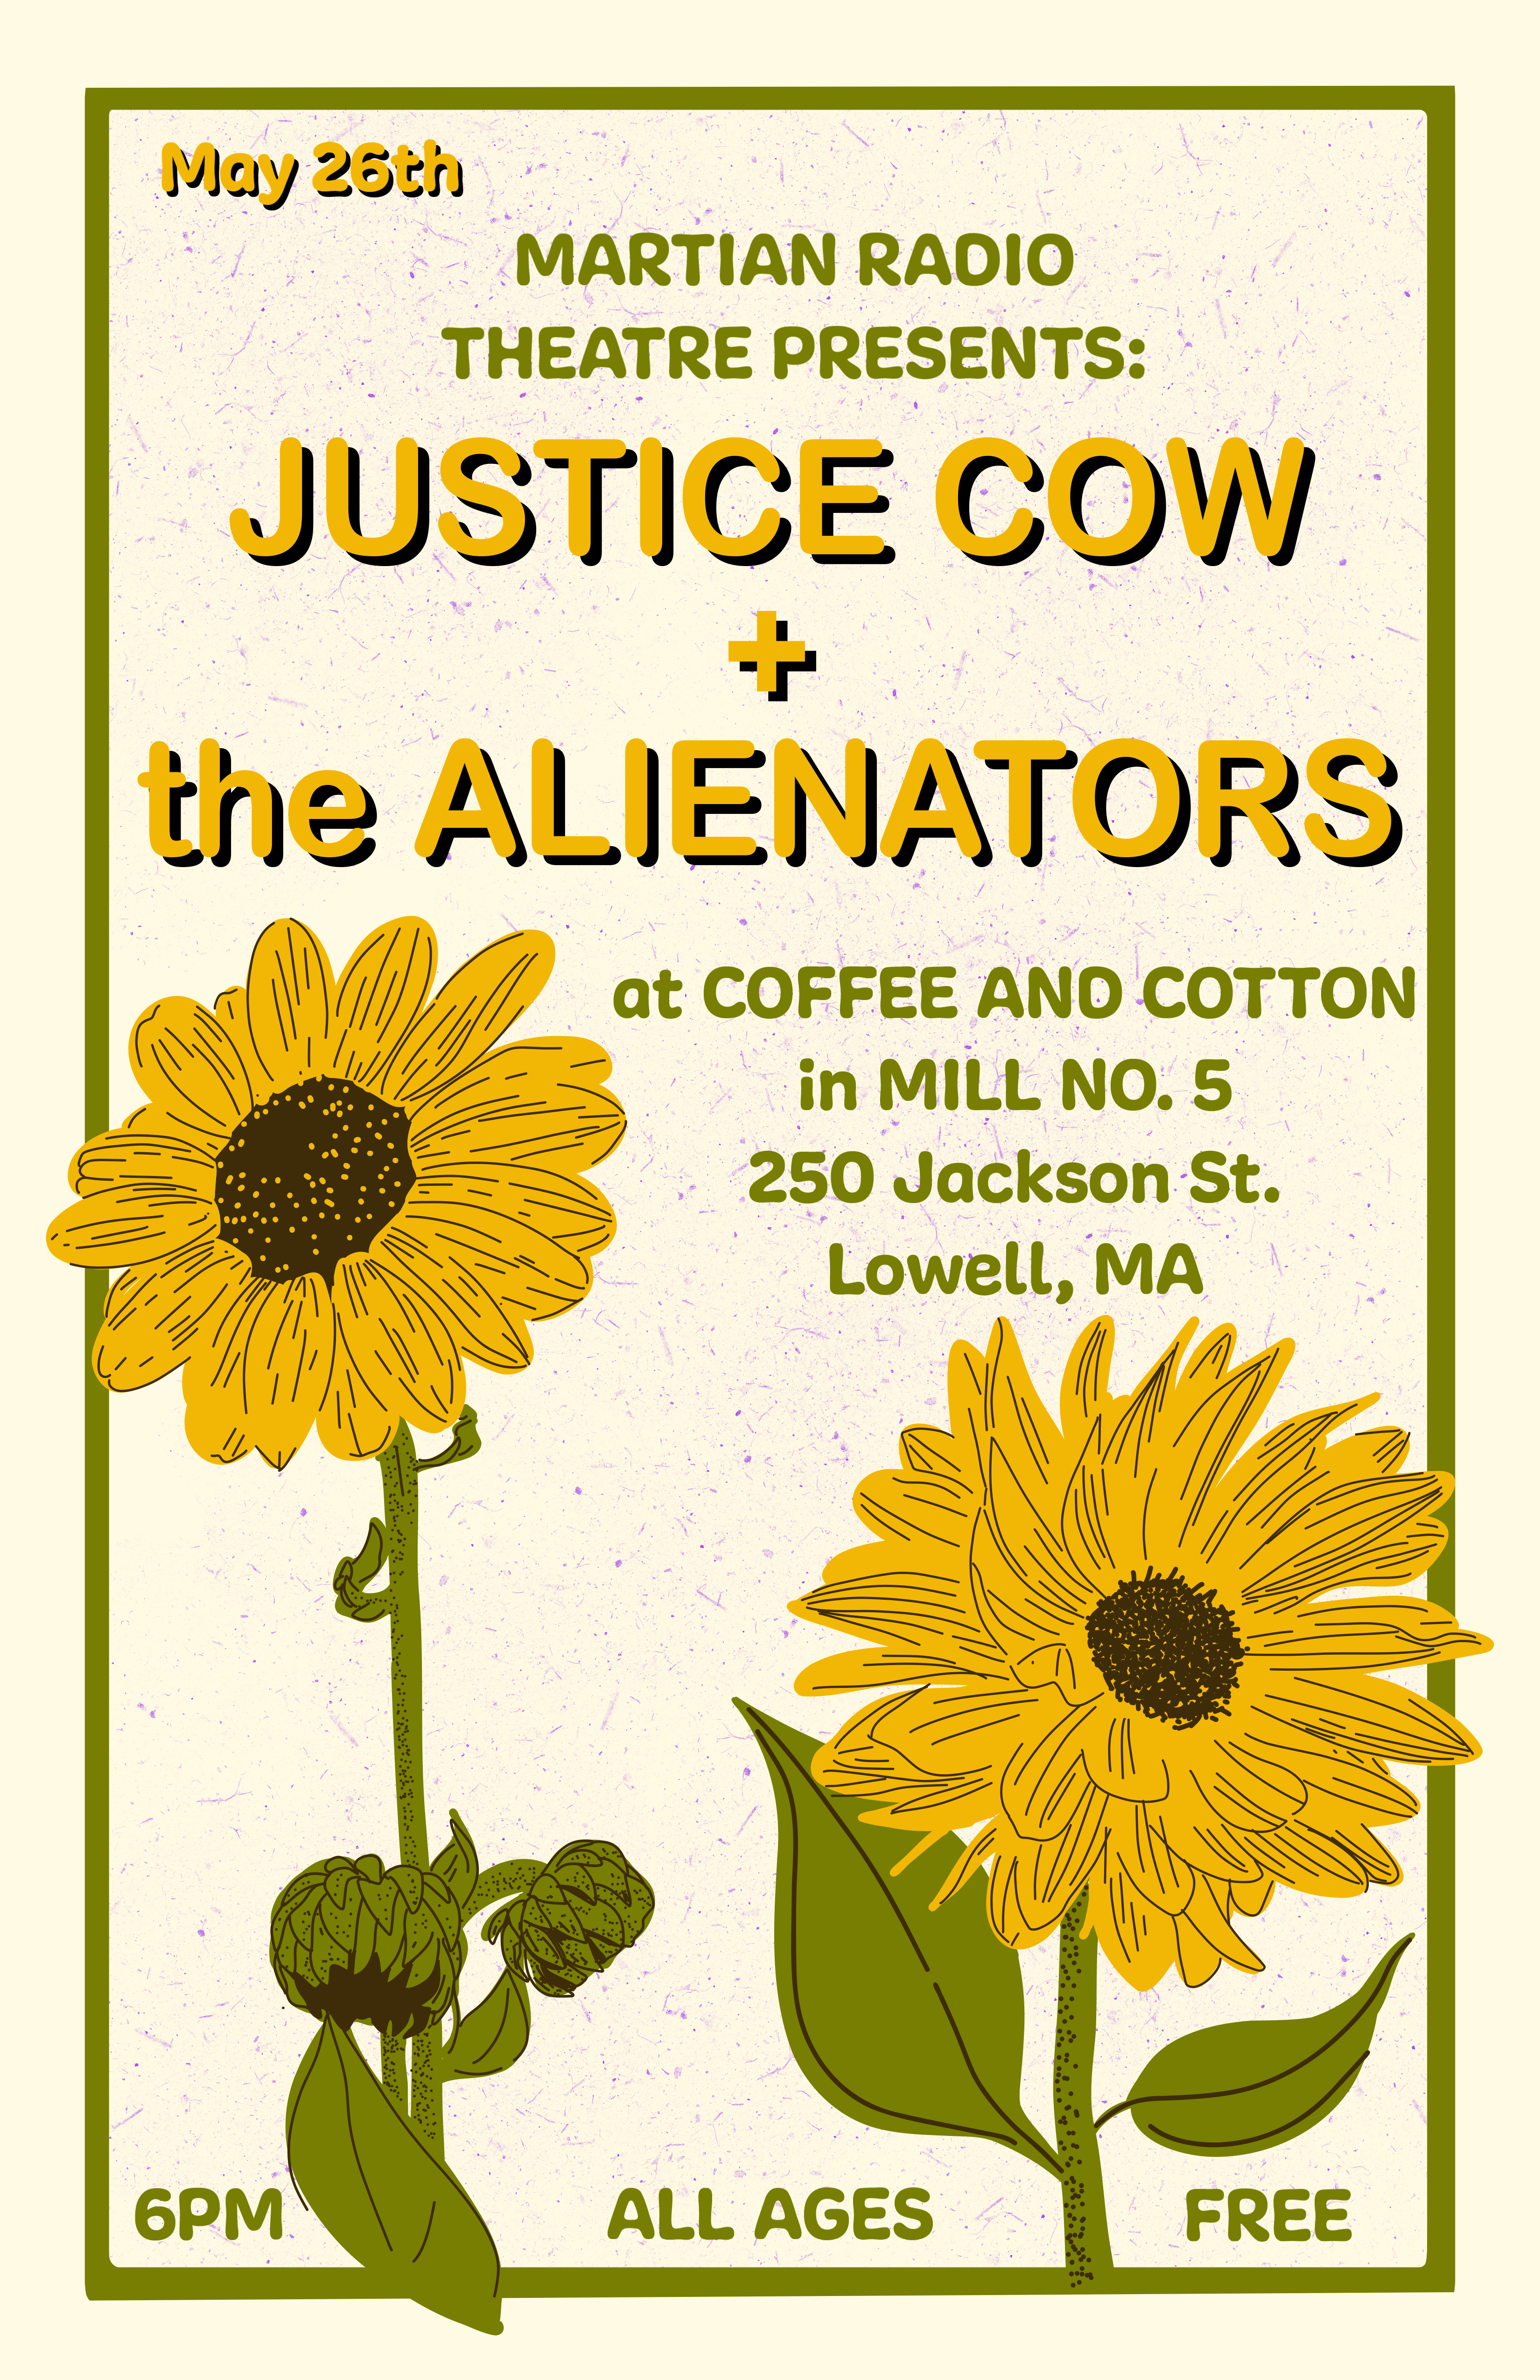 Martian Radio Theatre Presents: Justice Cow + the Alienators at Coffee and Cotton in Mill No.5, May 26, 2023